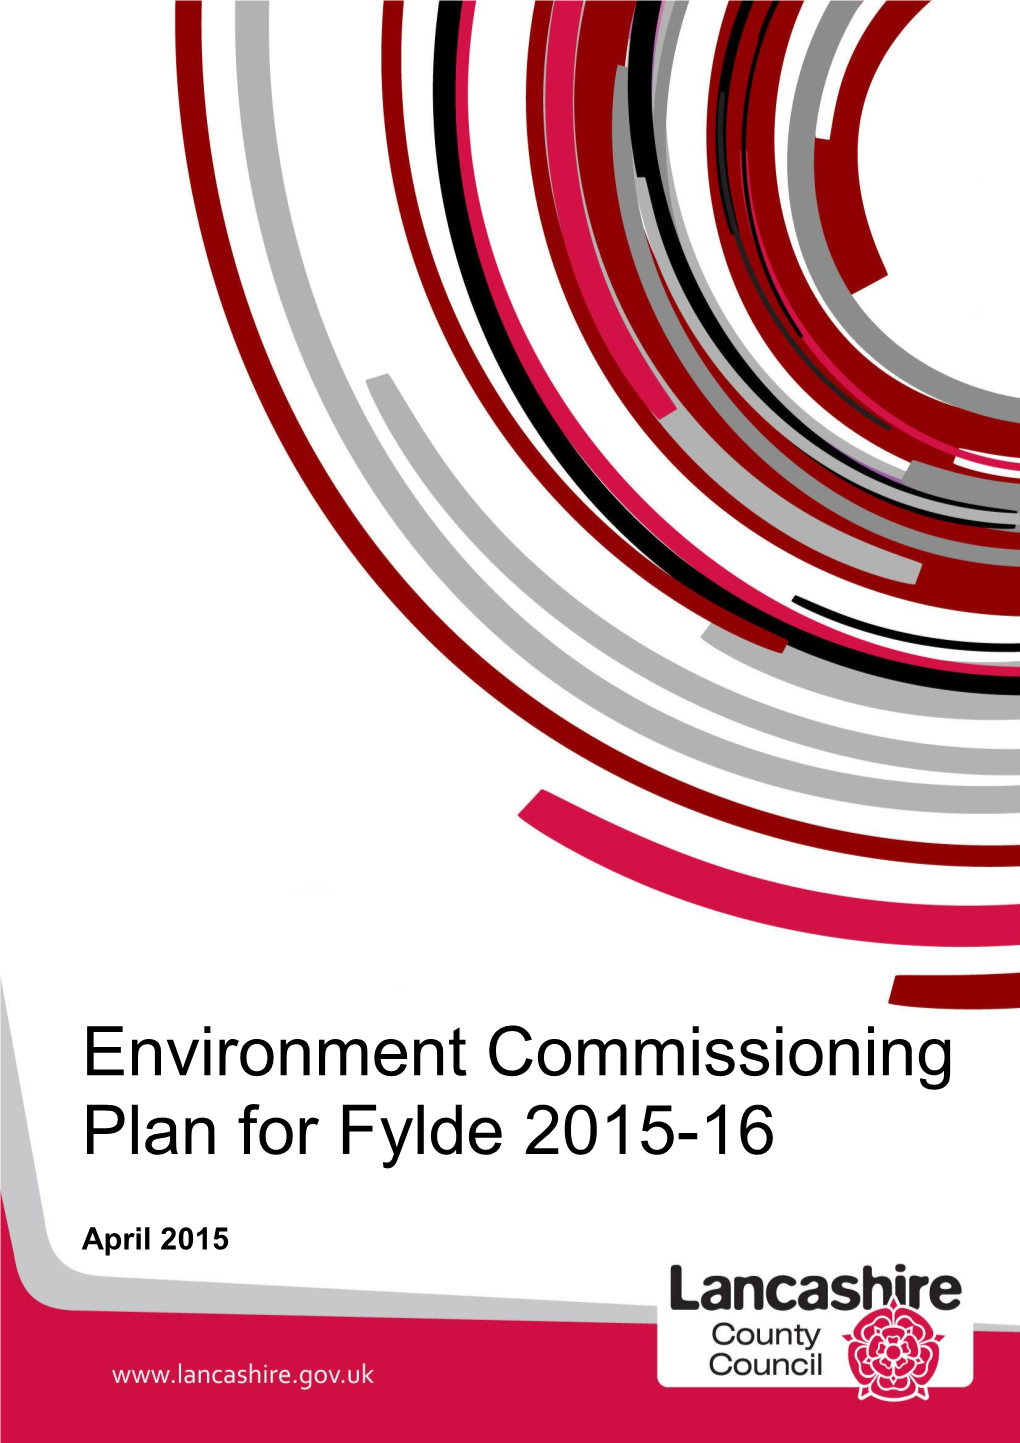 Environment Commissioning Plan for Fylde 2015-16